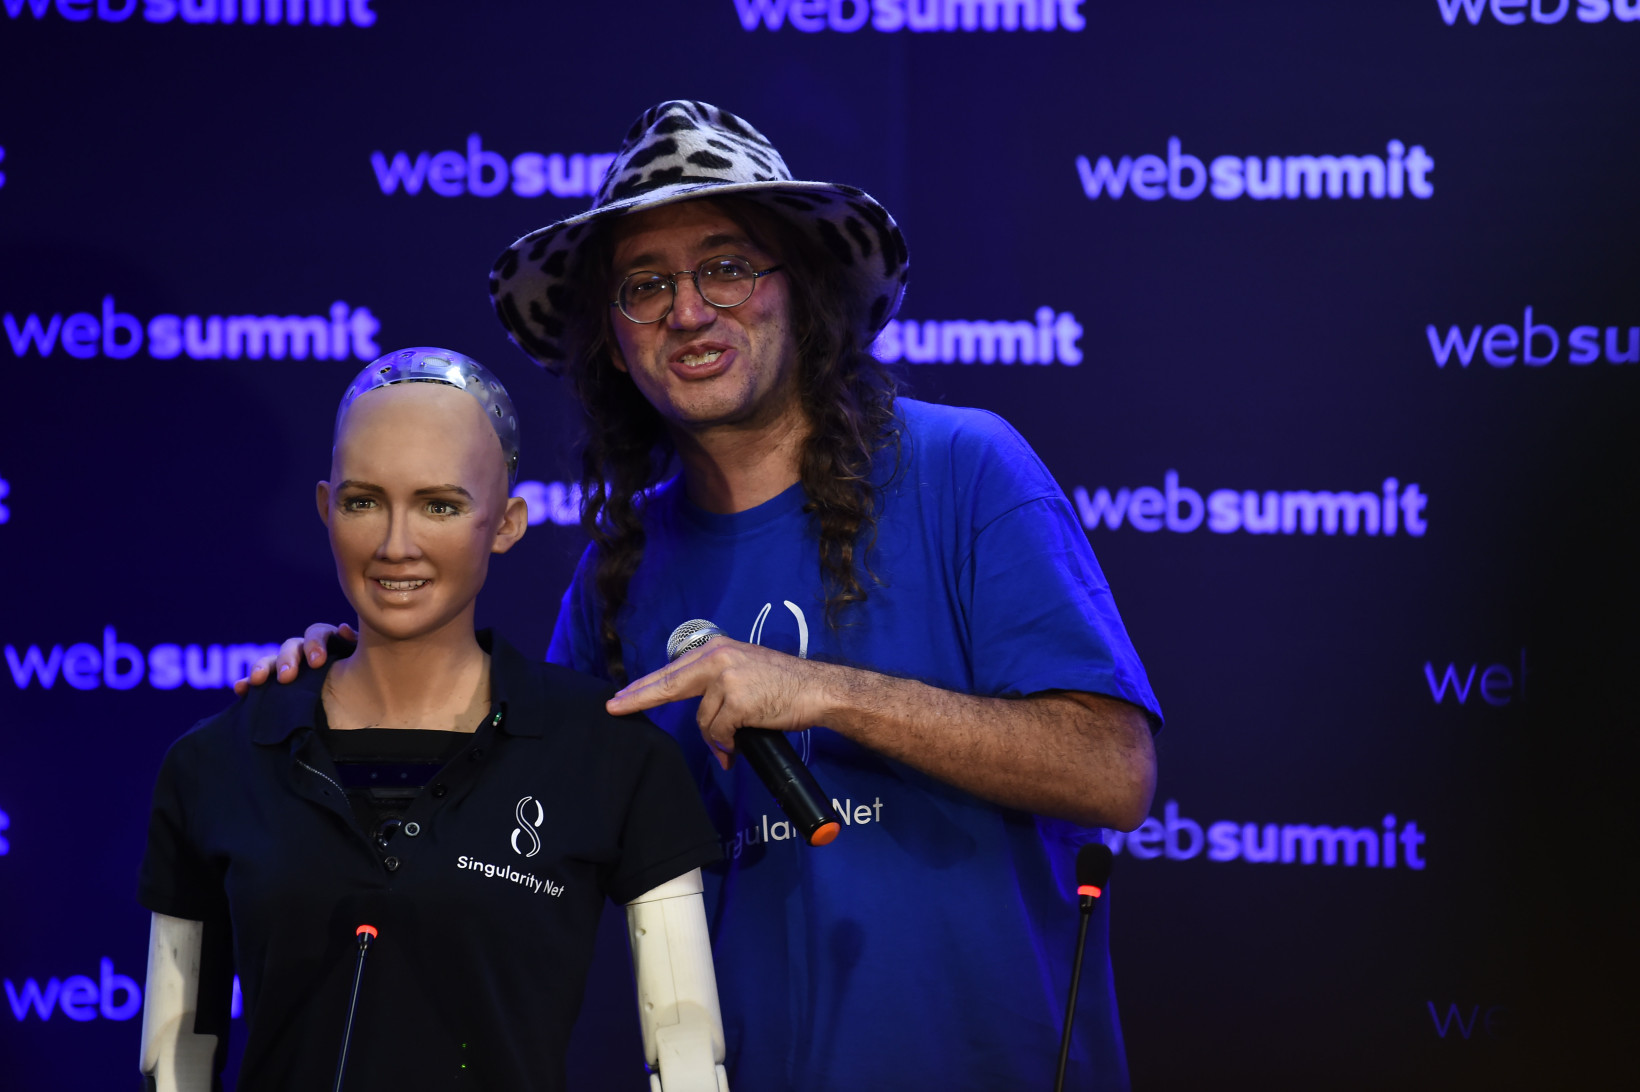 Goertzel (right) is best-known for co-creating Sophia the robot